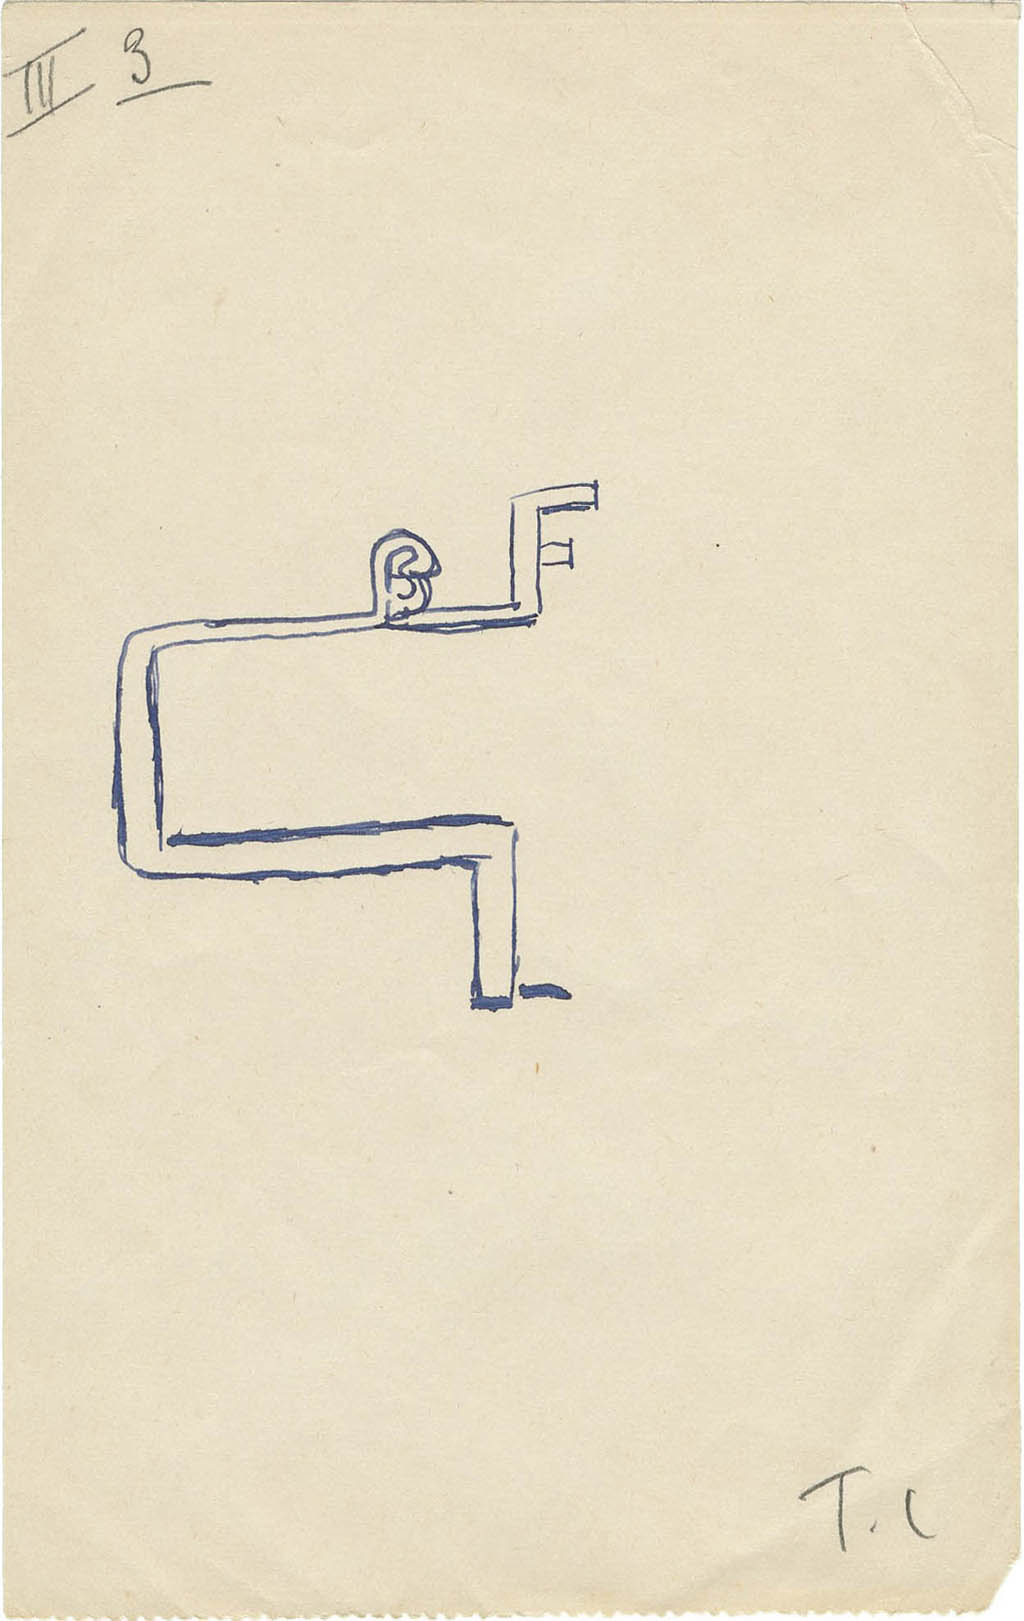 Jeu de Dessin Communique (Game of Communicated Drawing) - Therese Casa - Le Chaise RF (The Armchair RF) - c.1938 pencil and ink on six sheets of paper